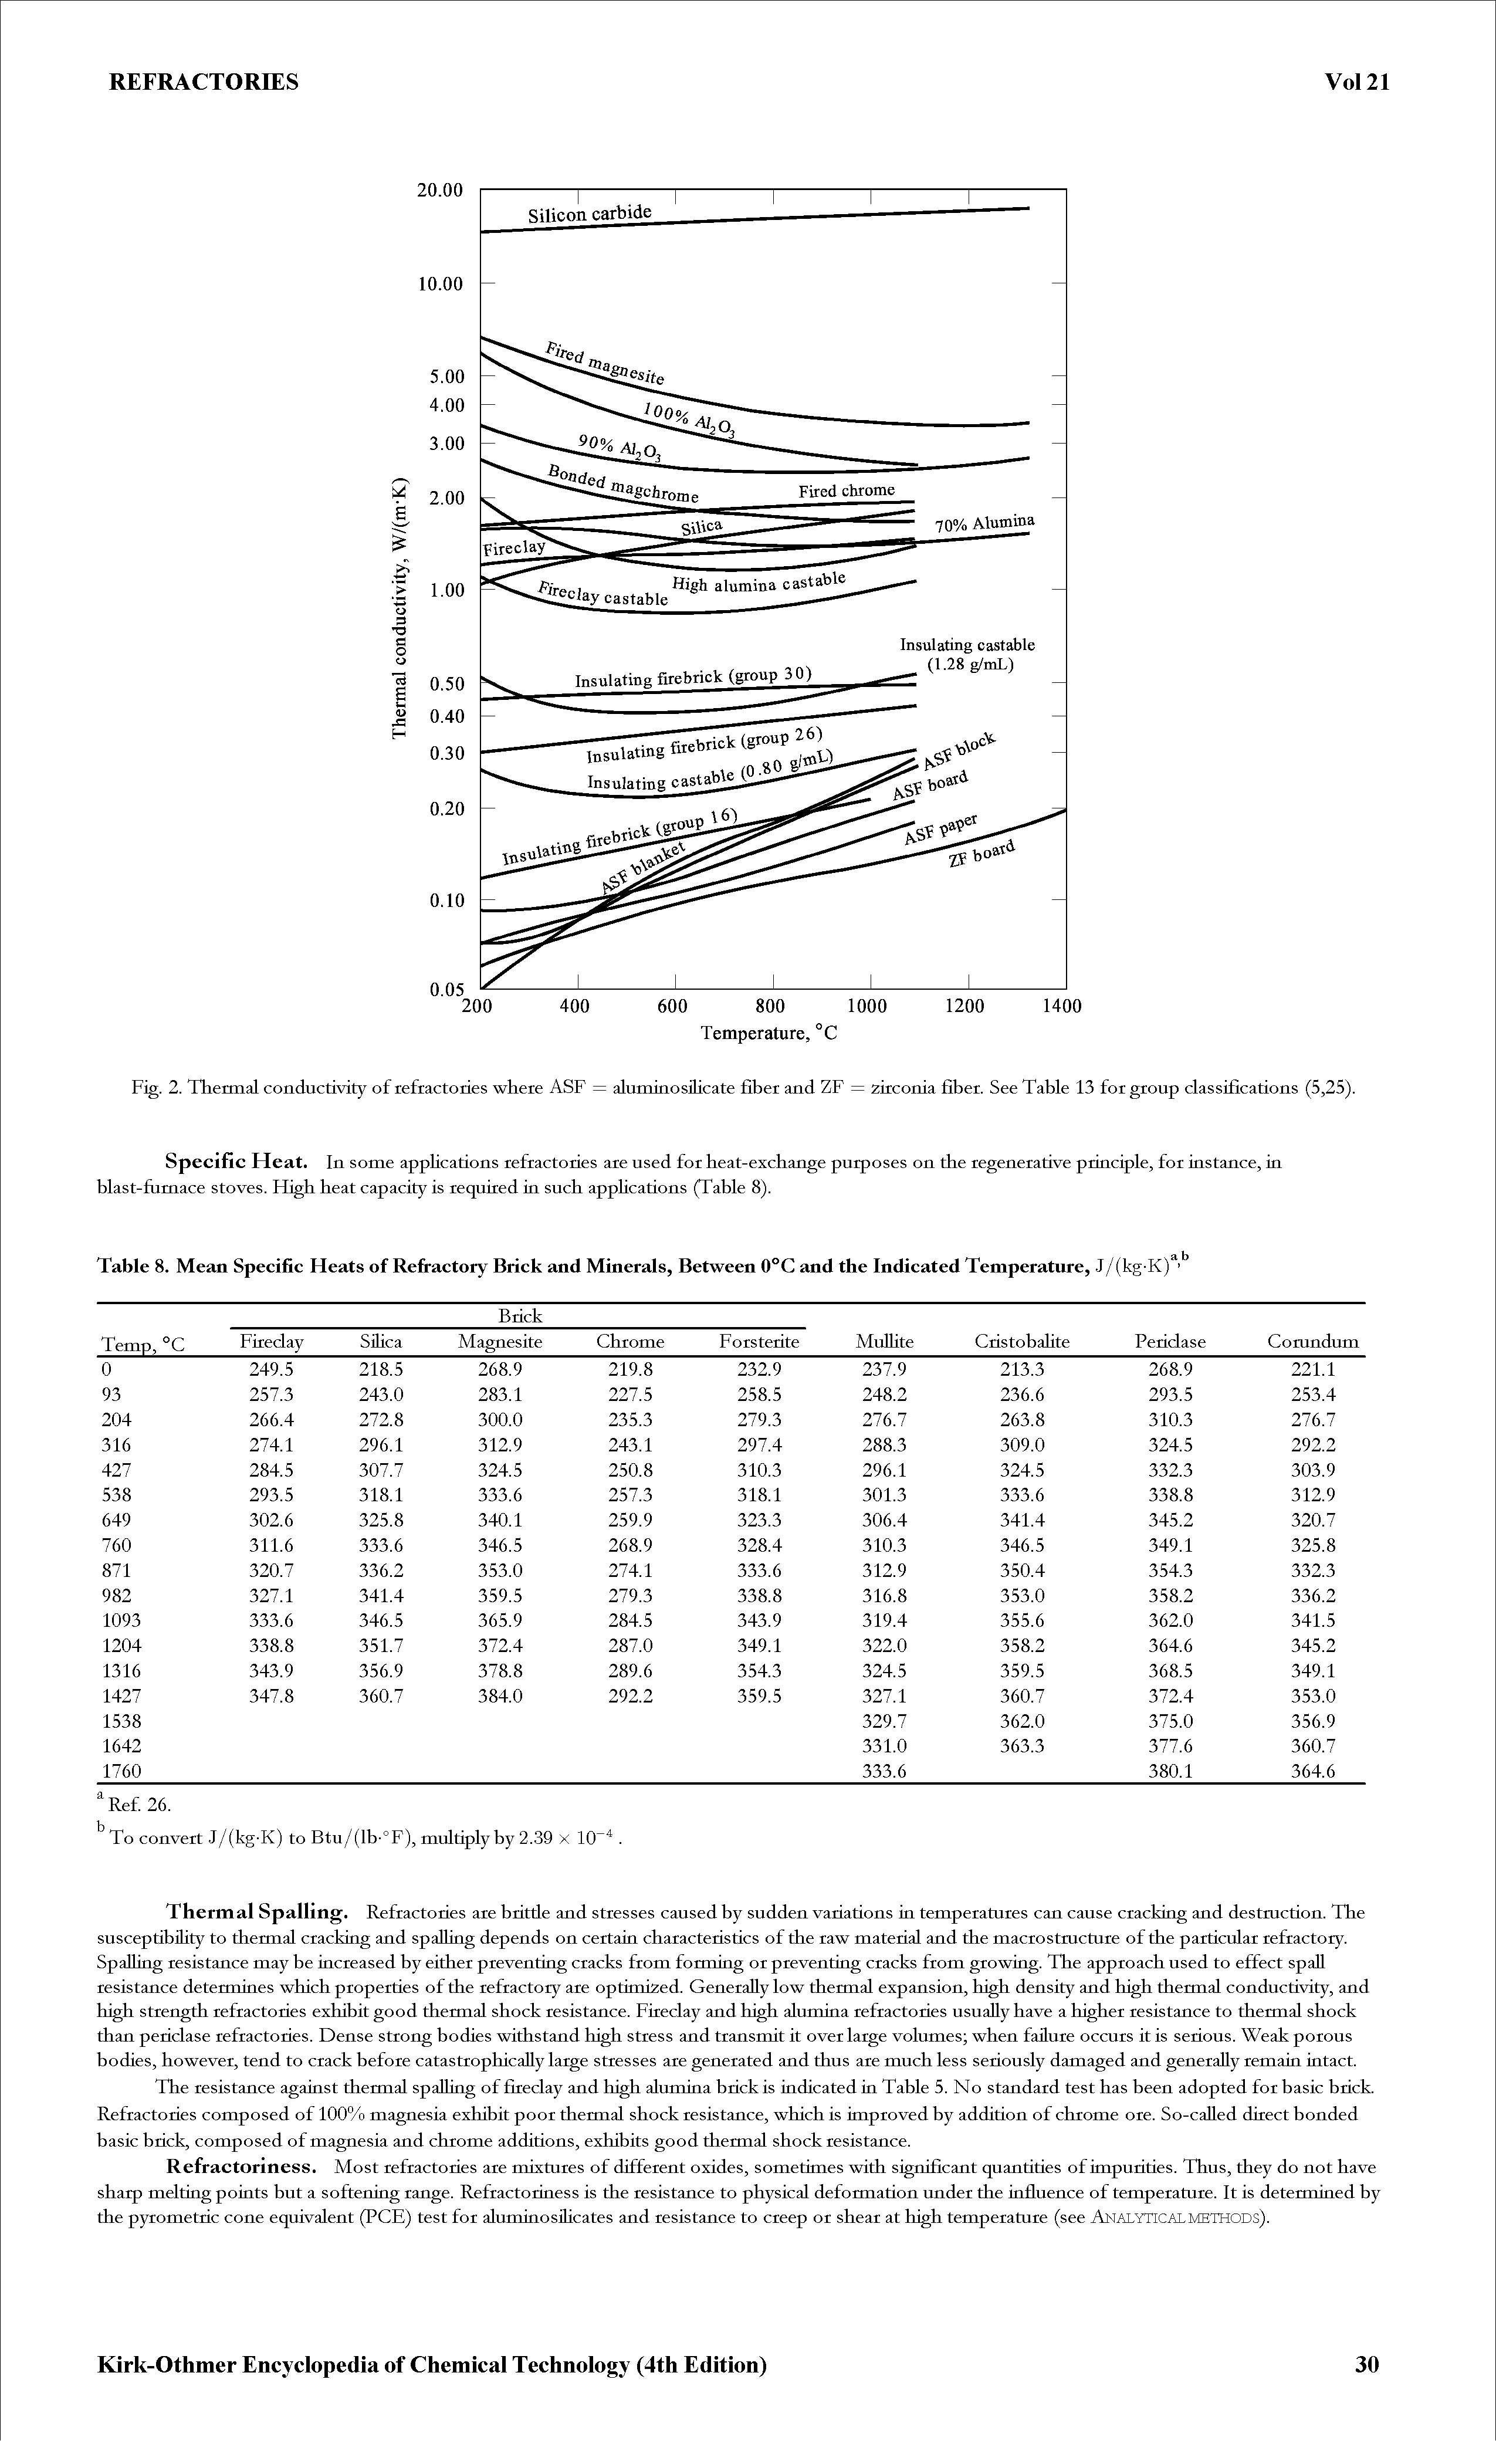 Fig. 2. Thermal conductivity of refractories where ASF = aluminosiUcate fiber and ZF = 2ii conia fiber. See Table 13 for group classifications (5,25).